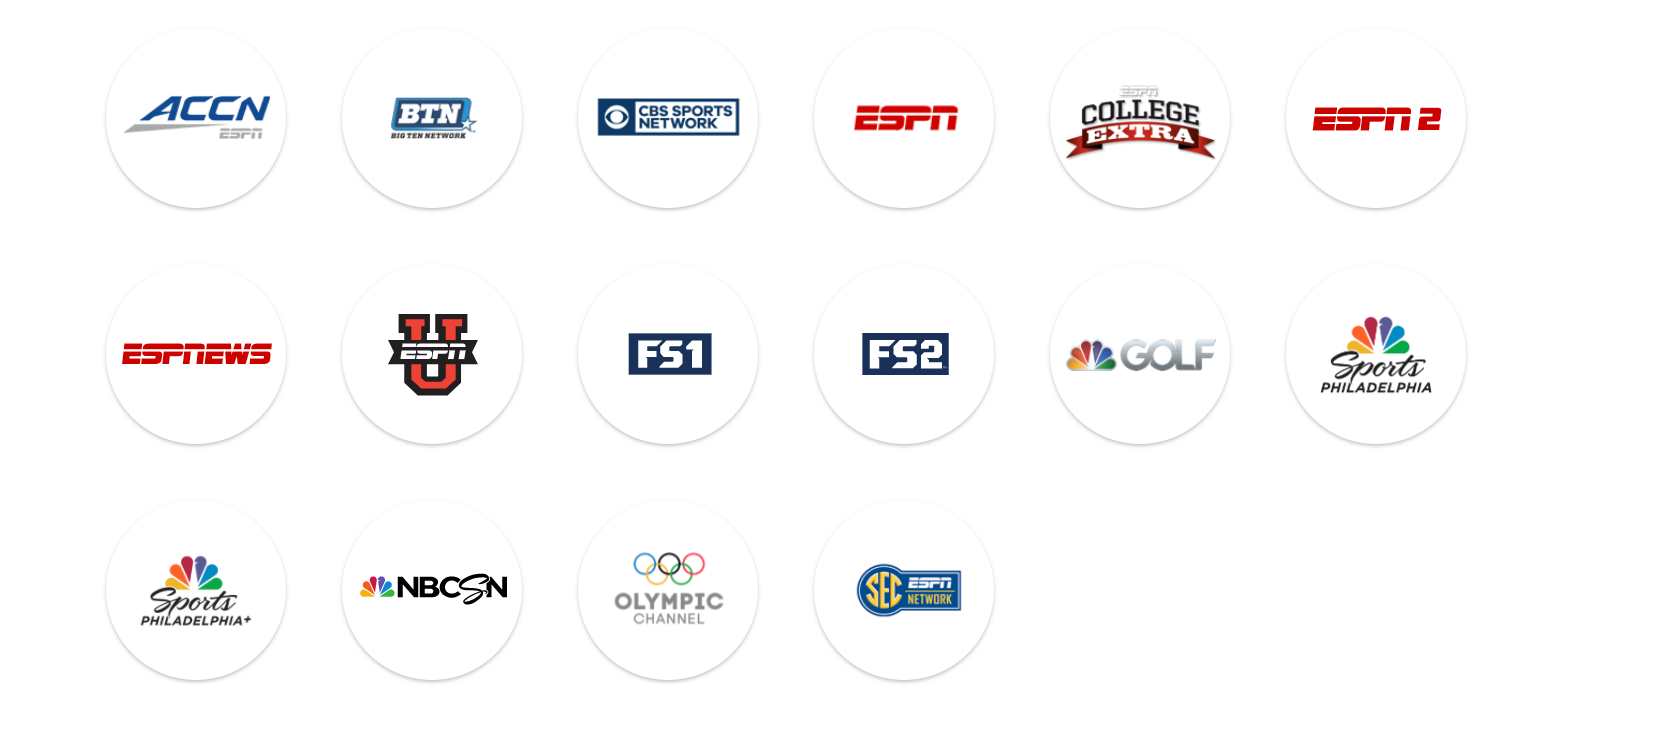 Hulu's available sports channels